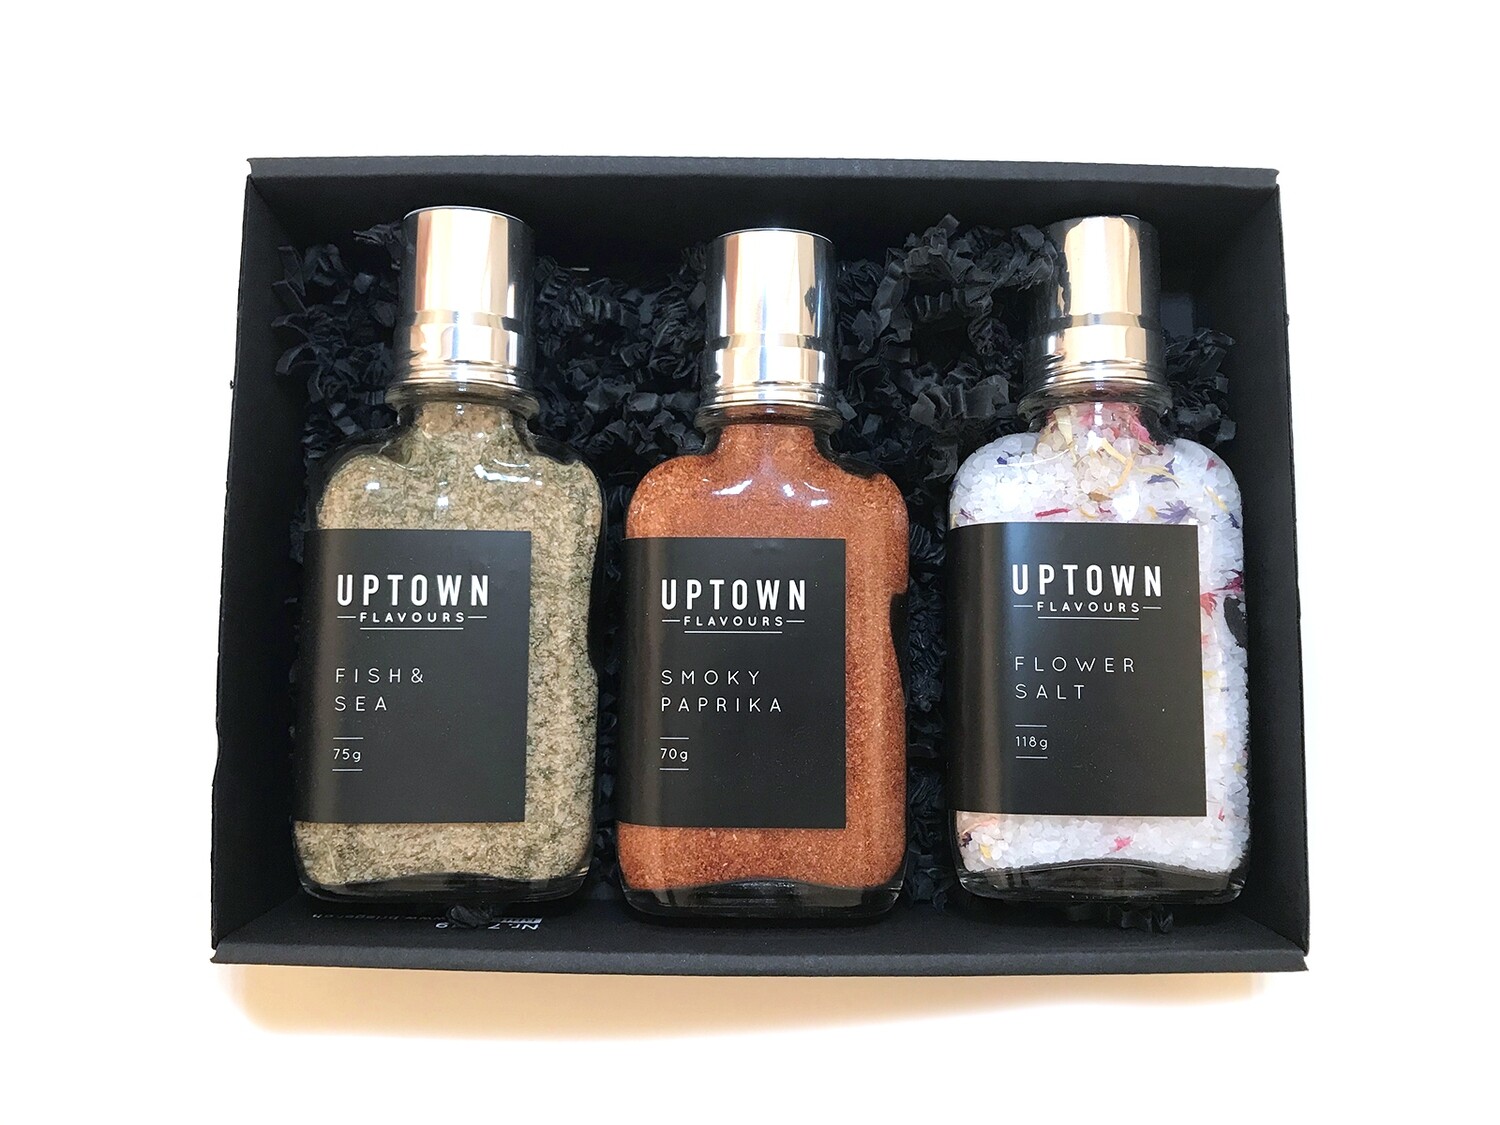 Standard 3er Box by Uptown Flavours